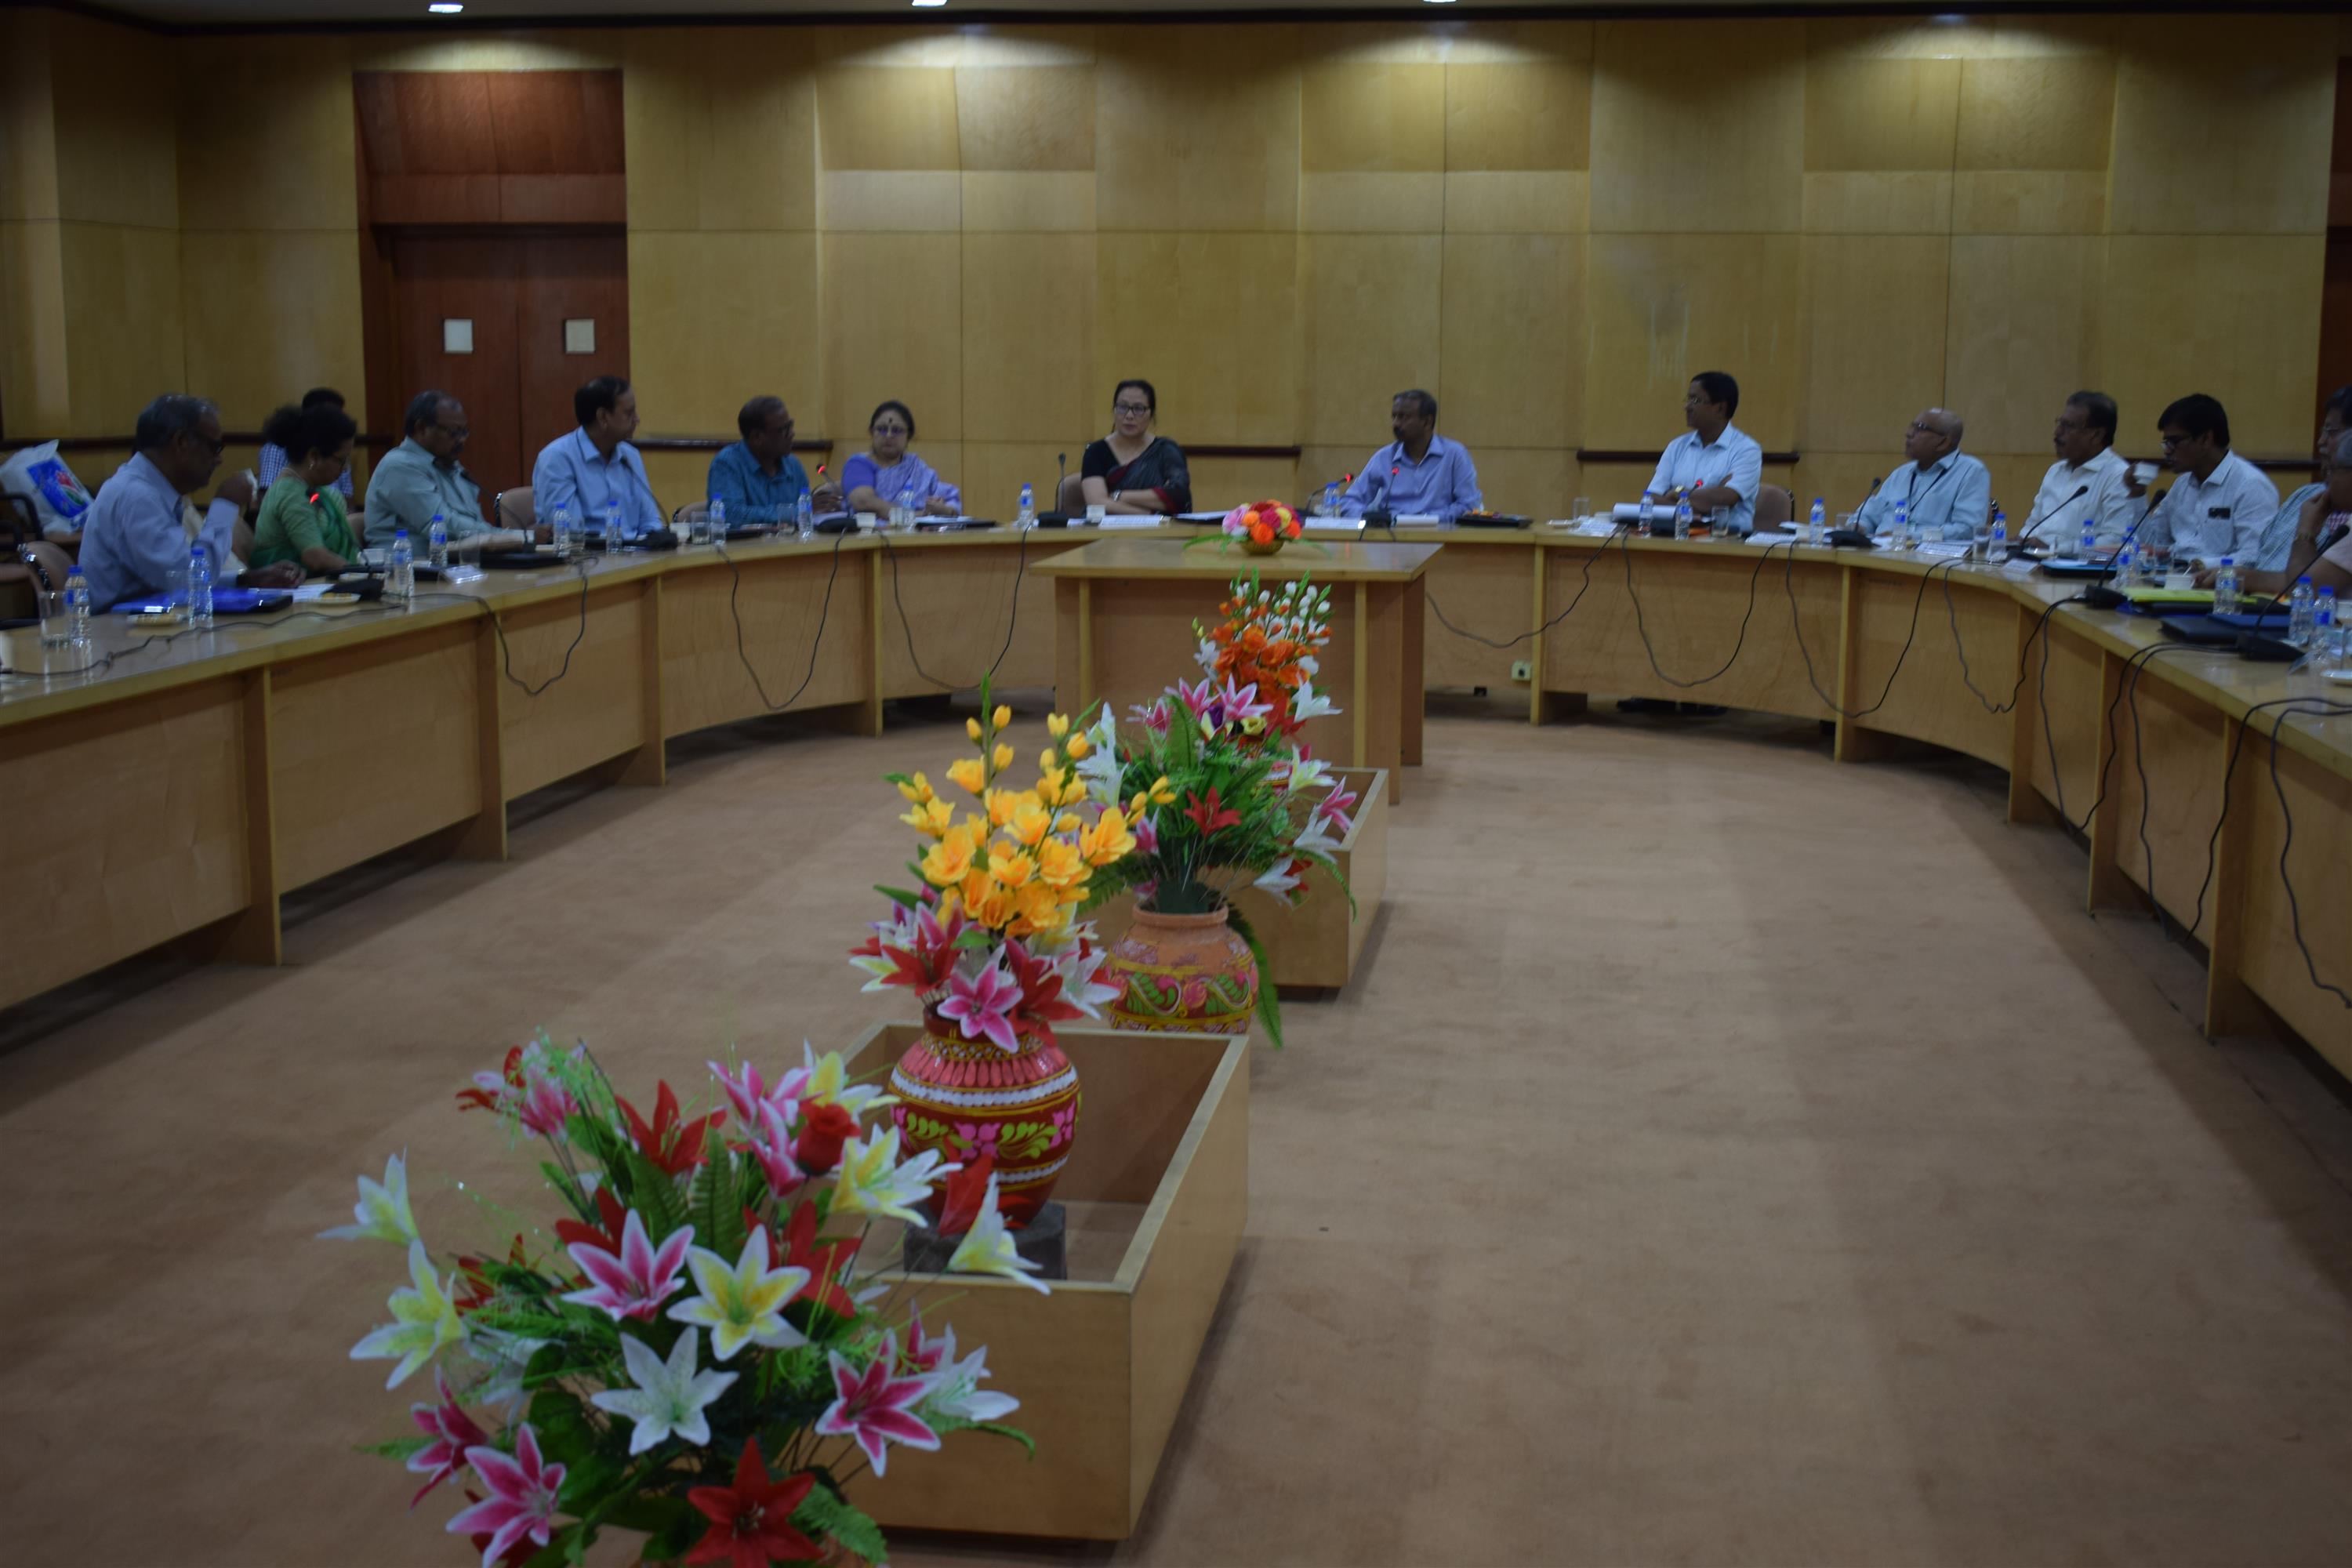 SHRI AMIT KHARE, SECRETARY, UNION MINISTRY OF INFORMATION & BROADCASTING IN A REVIEW MEETING WITH THE HEADS OF MEDIA UNITS UNDER I & B MINISTRY IN KOLKATA AT NATIONAL LIBRARY IN KOLKATA ON 27.07.2019.